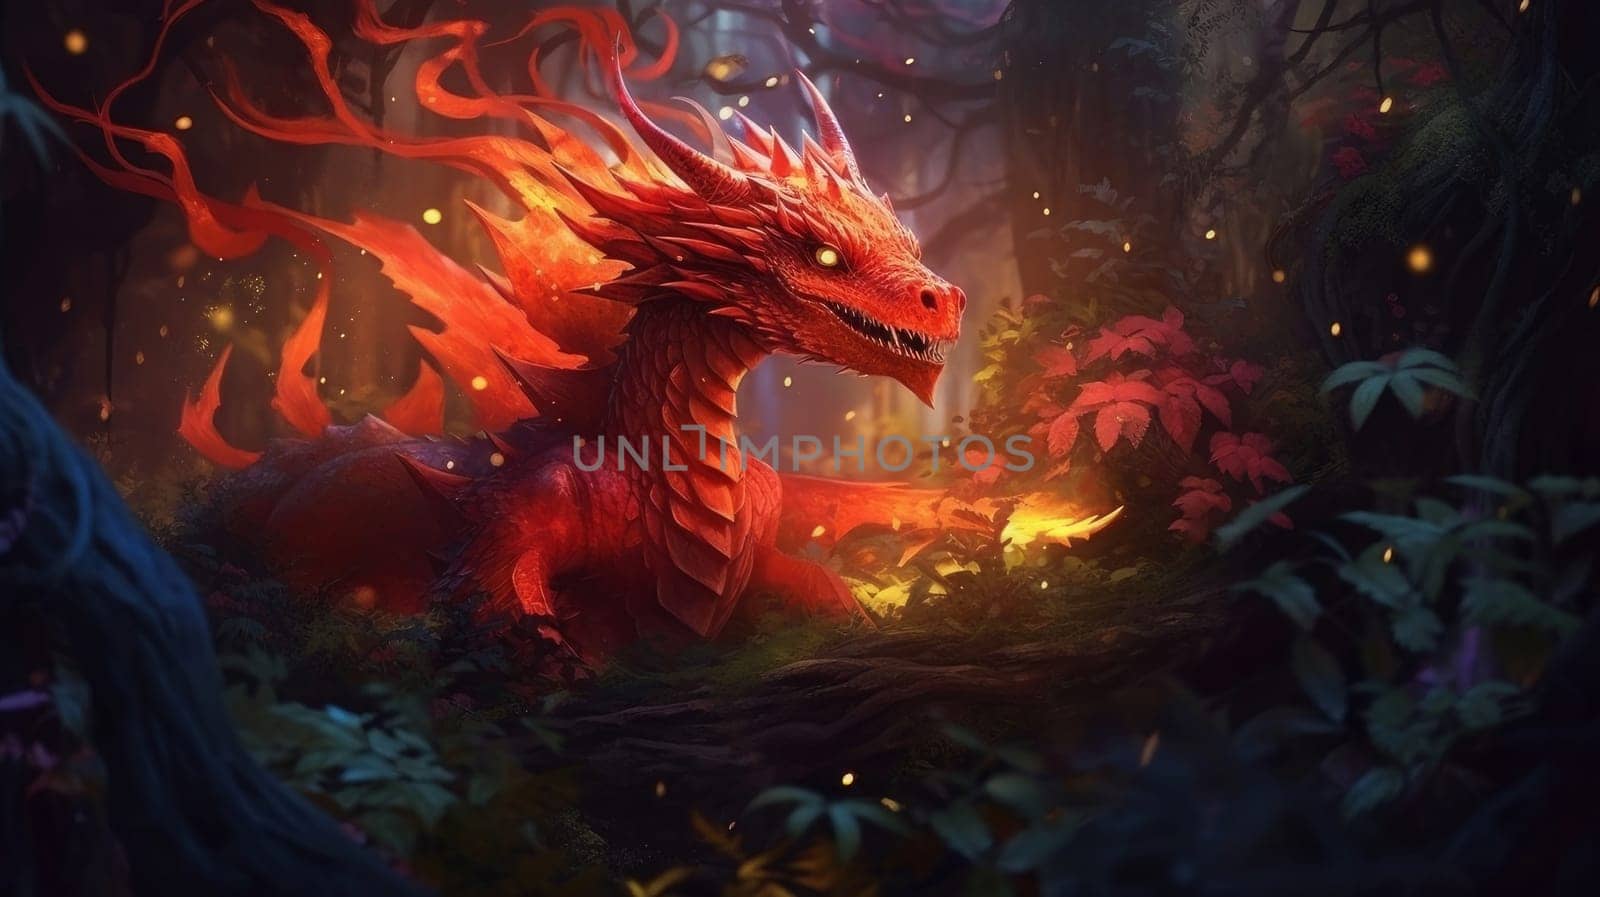 A large, red dragon is a symbol of the new year according to the eastern calendar. AI generated